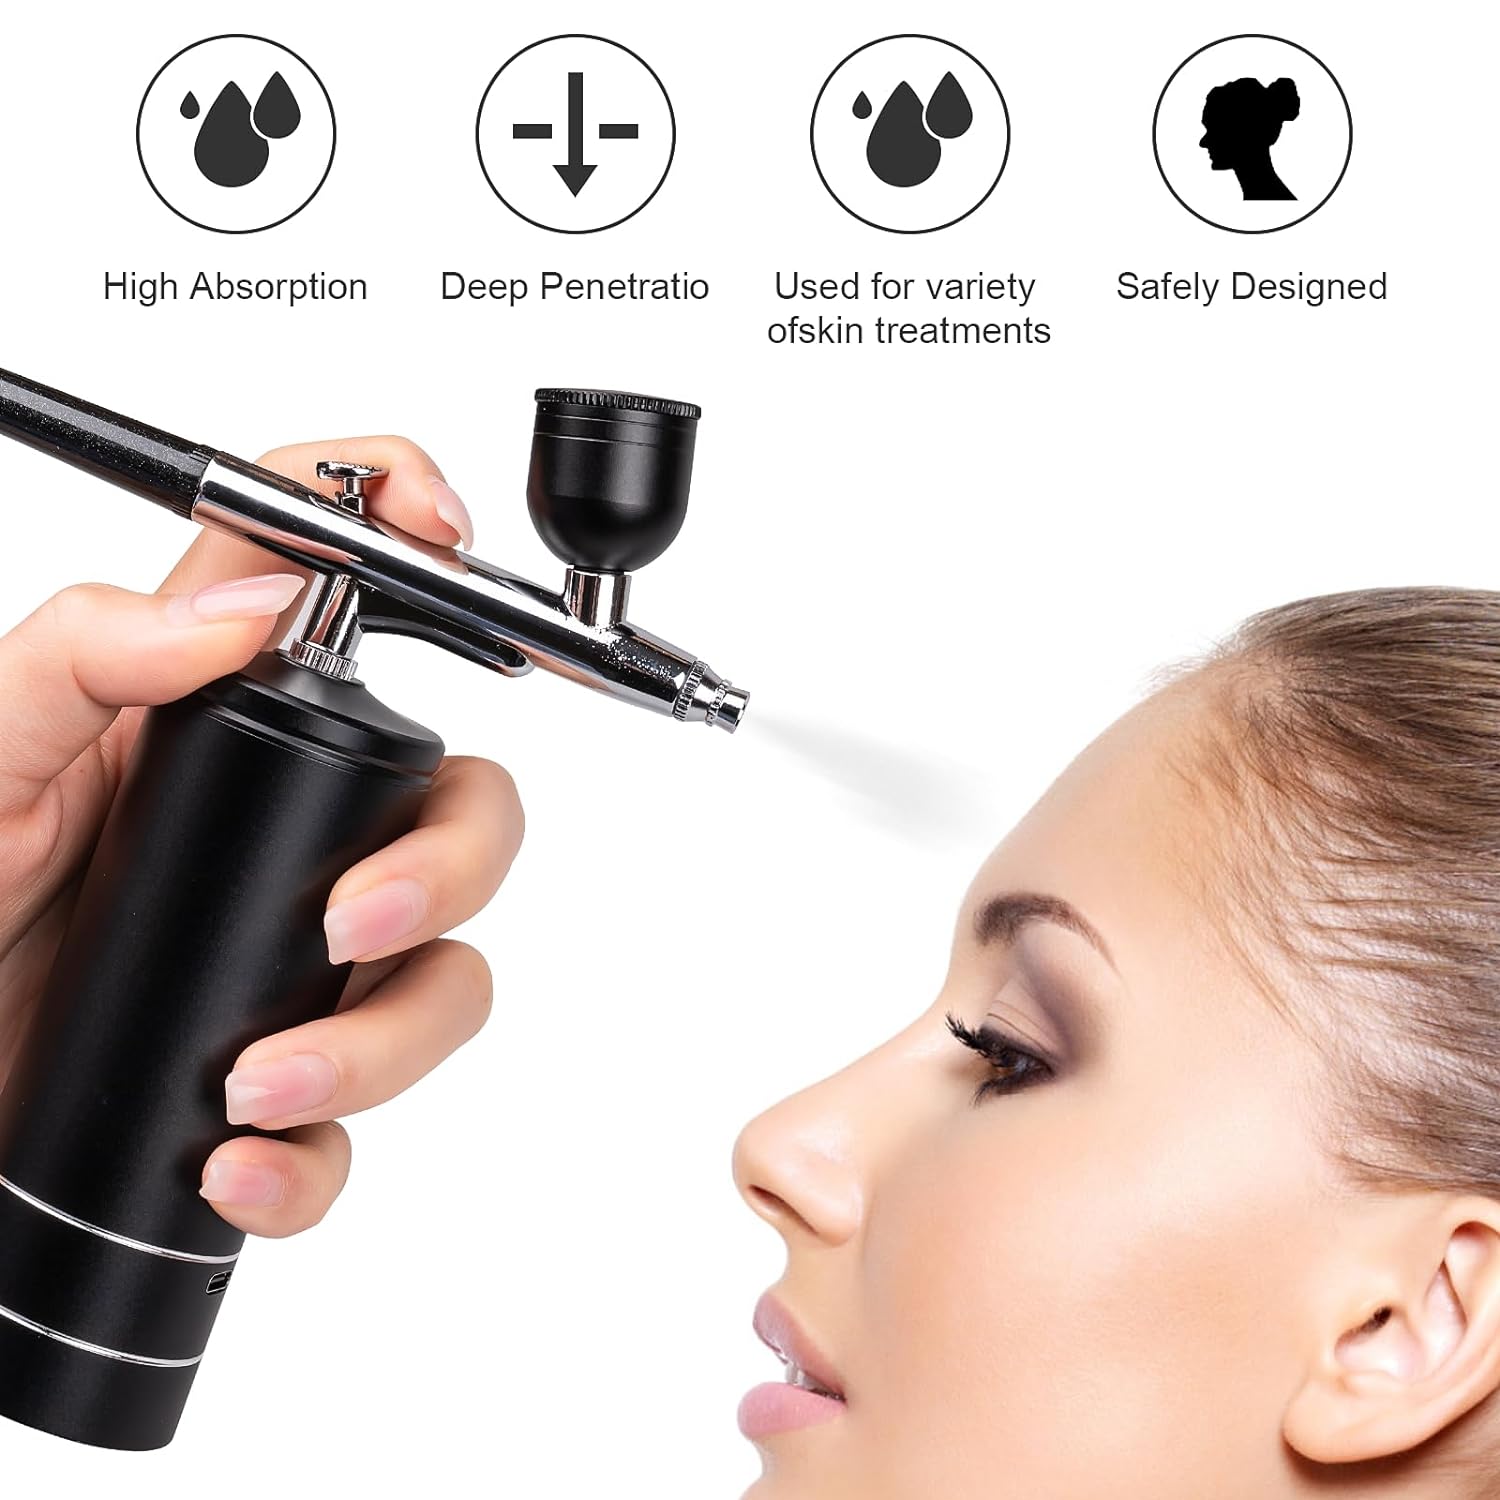 Esakoya Airbrush Kit Rechargeable Cordless Airbrush Compressor, 30PSI High Pressure, Portable Handheld Airbrush Gun with 0.3mm Nozzle and Cleaning Brush Set for Makeup, Barber, Nail Art, Cake Decor